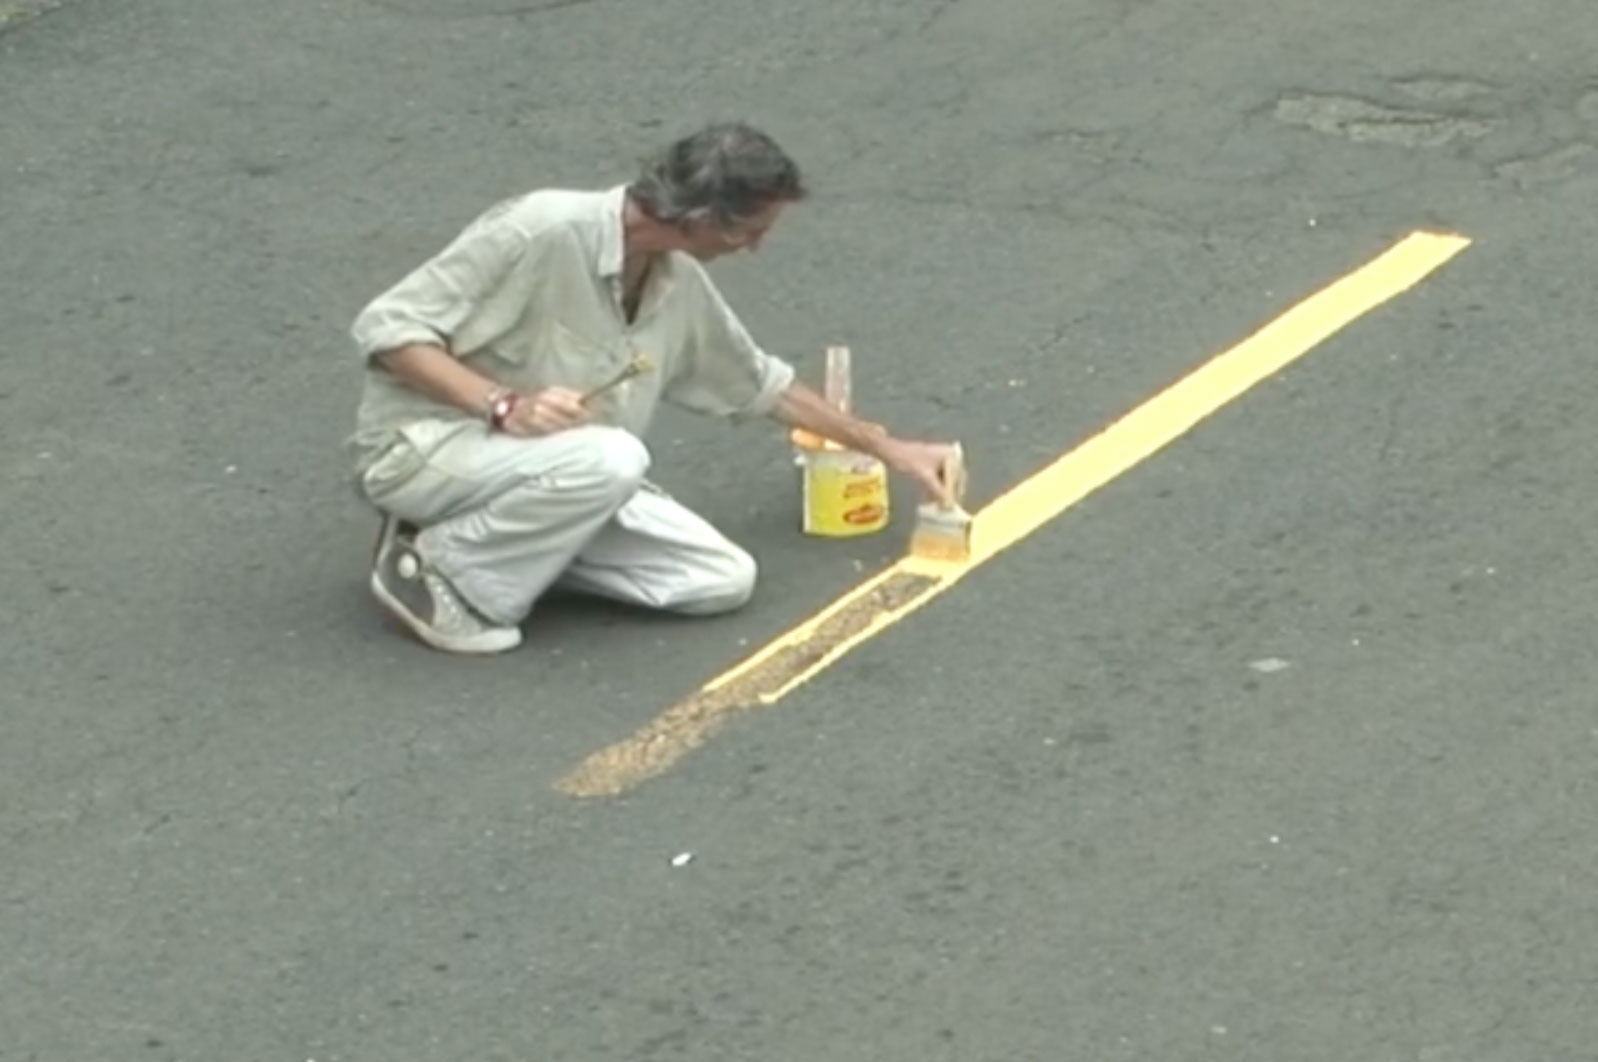 A still frame from Francis Alÿs’ video work ‘Painting/Retoque’ shows a person crouched on a tarred road repainting a faded road marking with yellow paint.
